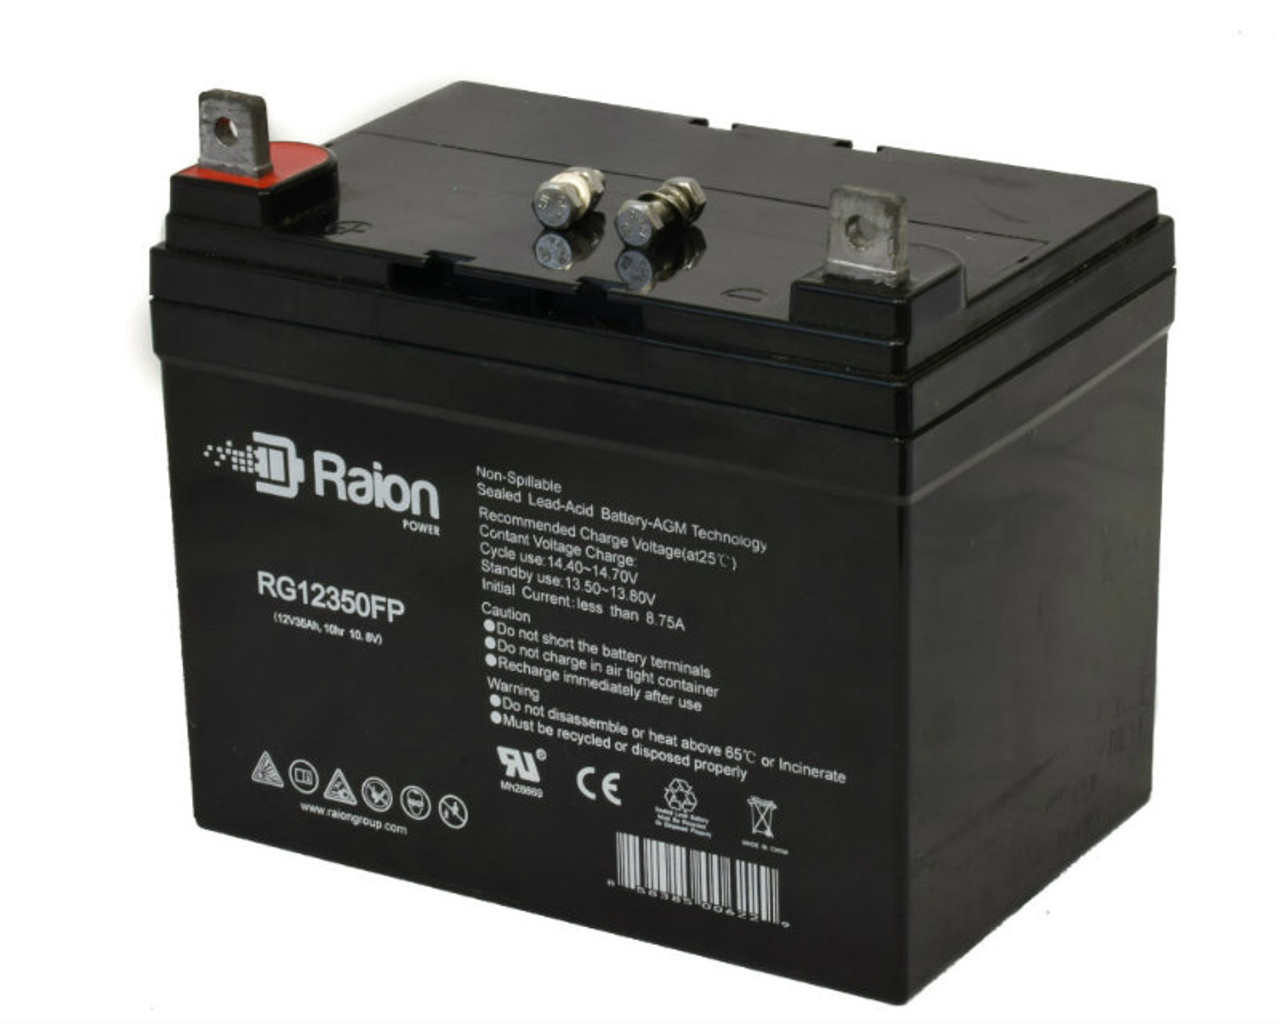 Raion Power Replacement 12V 35Ah Battery for Ingersol Equipment 3010 - 1 Pack